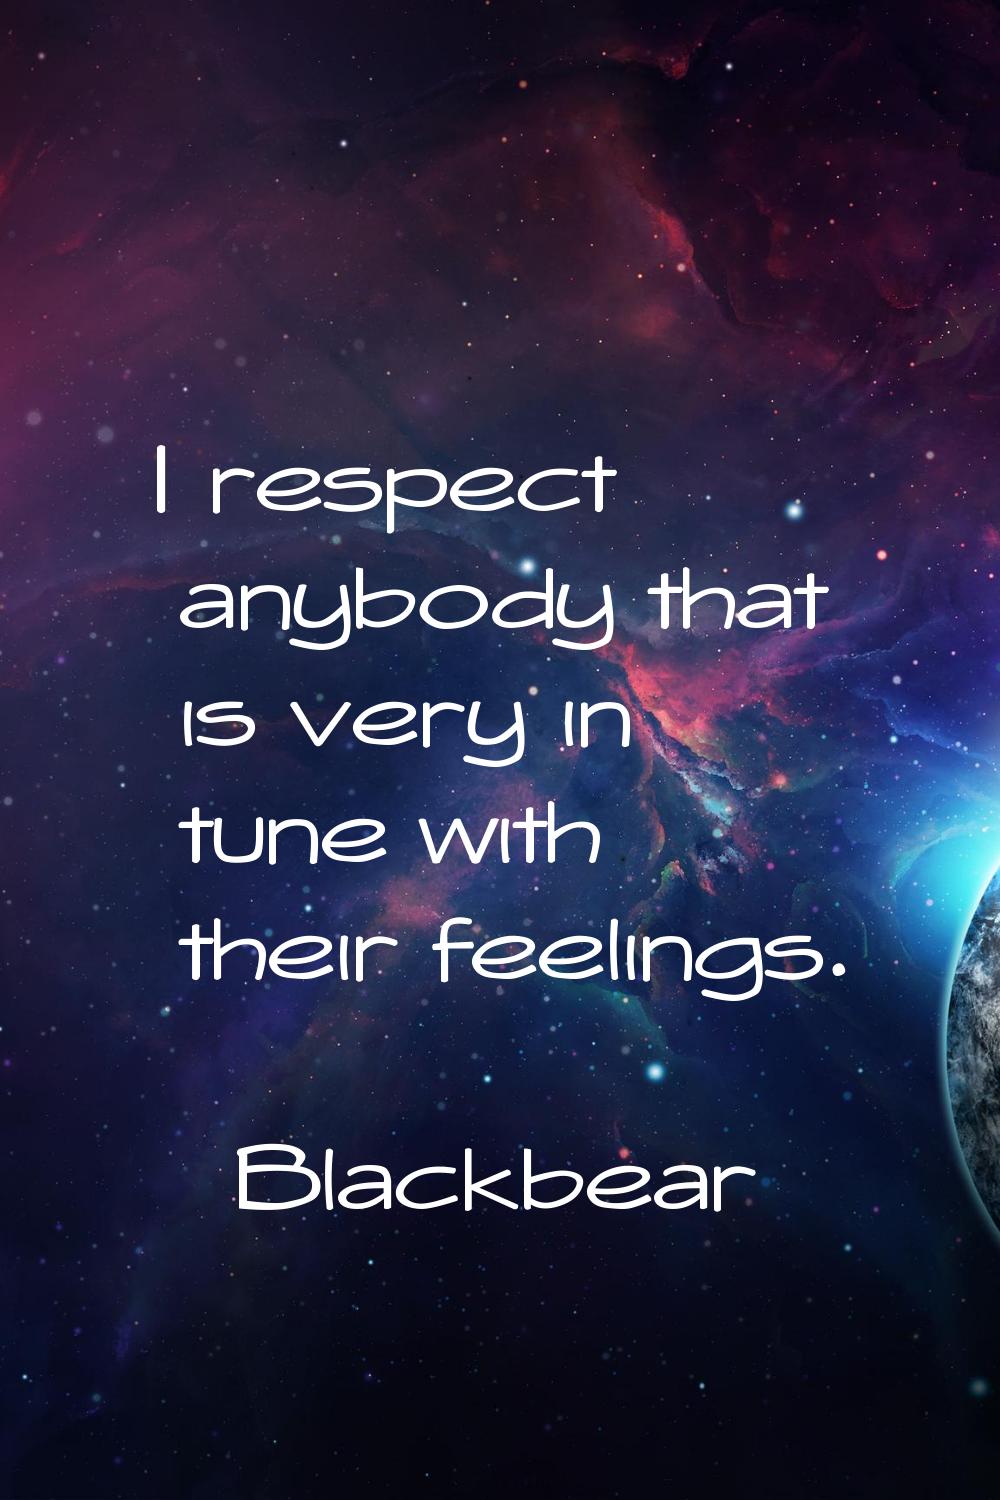 I respect anybody that is very in tune with their feelings.